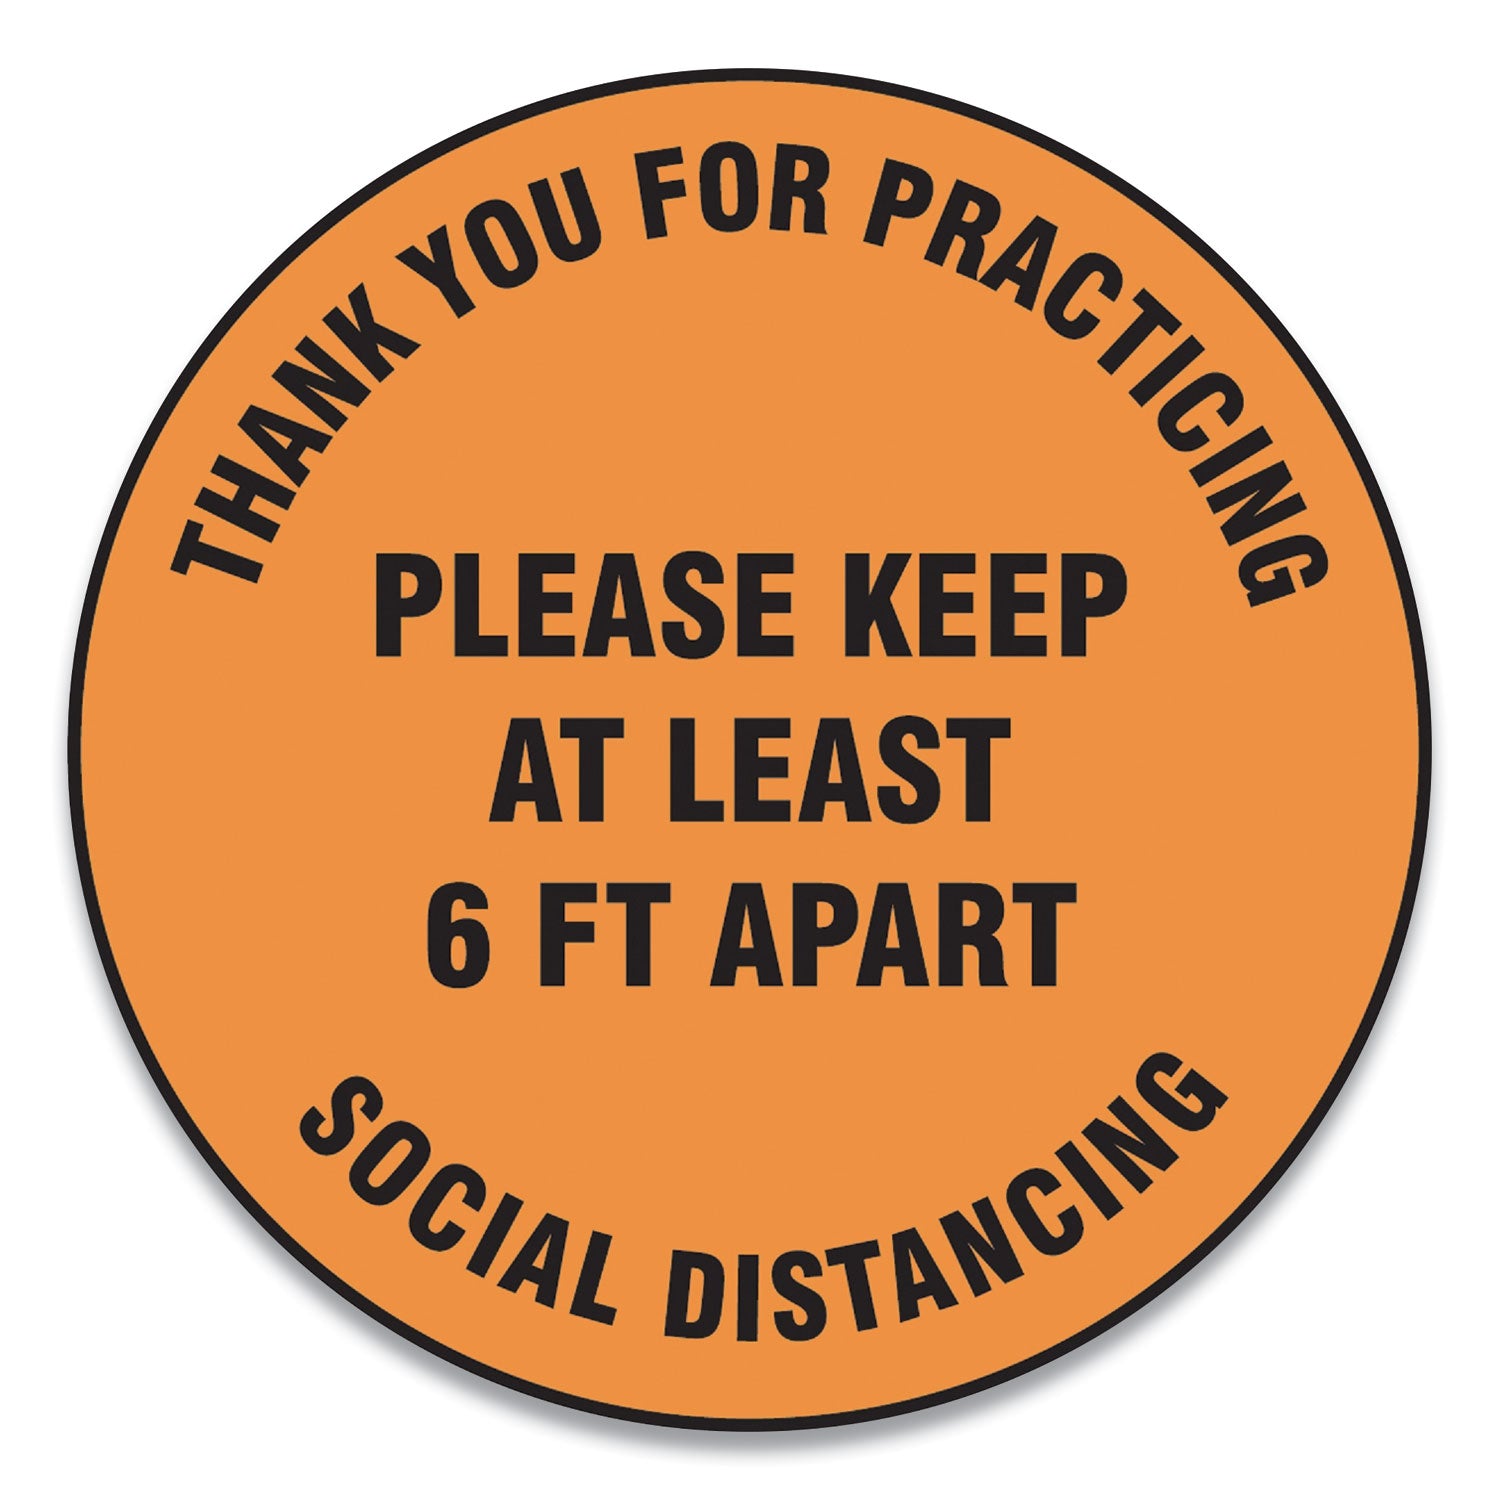 slip-gard-floor-signs-17-circlethank-you-for-practicing-social-distancing-please-keep-at-least-6-ft-apart-orange-25-pk_gn1mfs429esp - 1